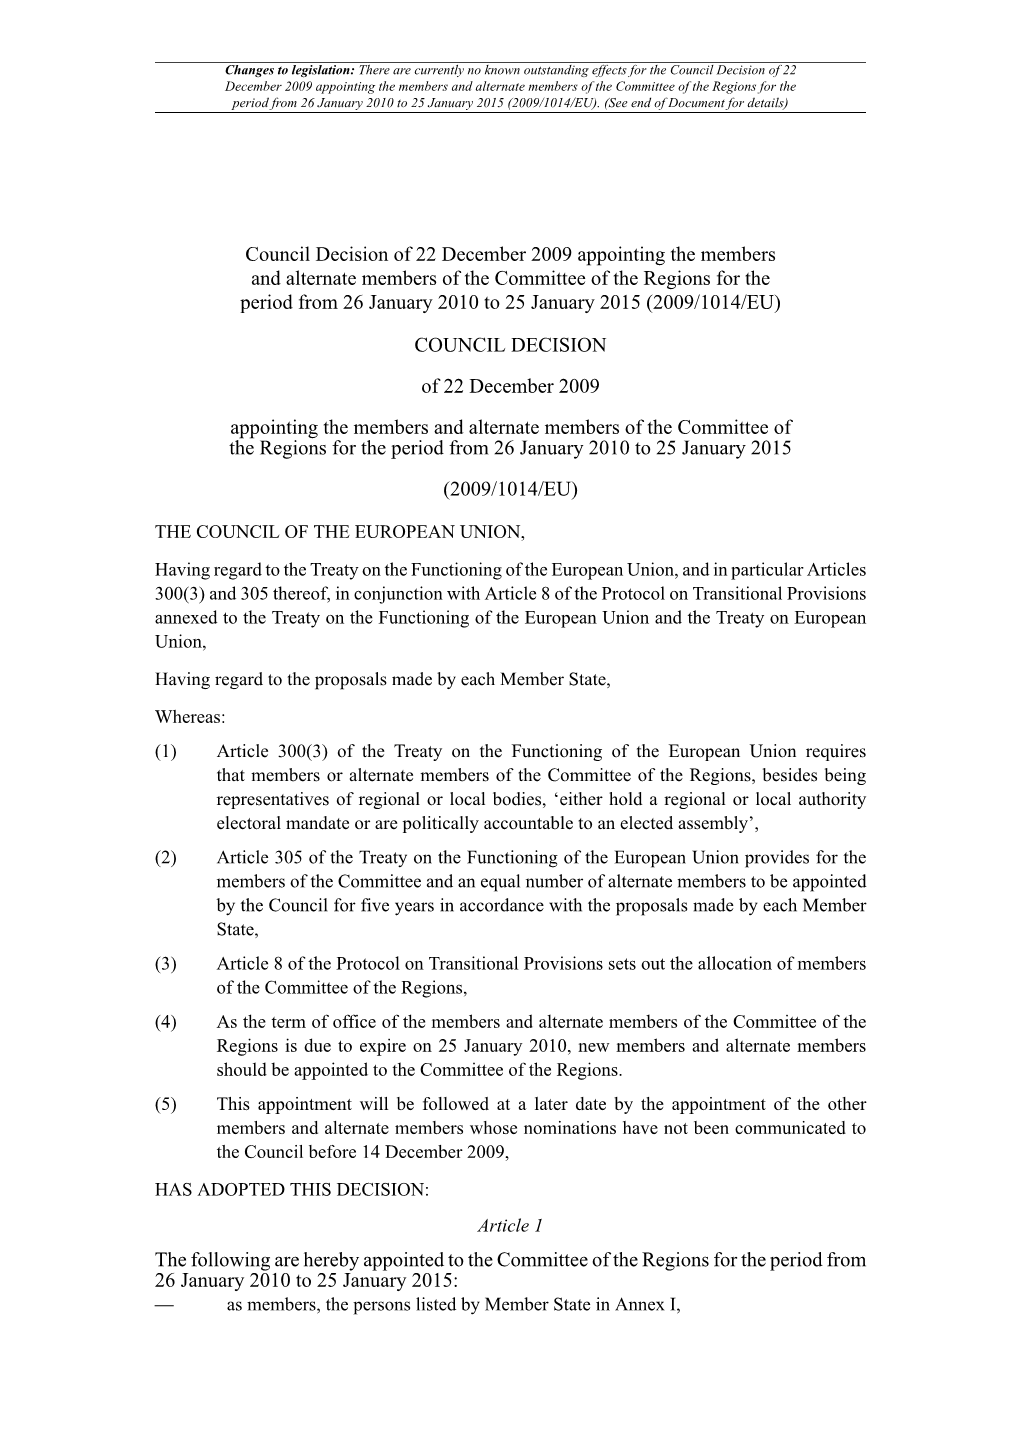 Council Decision of 22 December 2009 Appointing the Members And